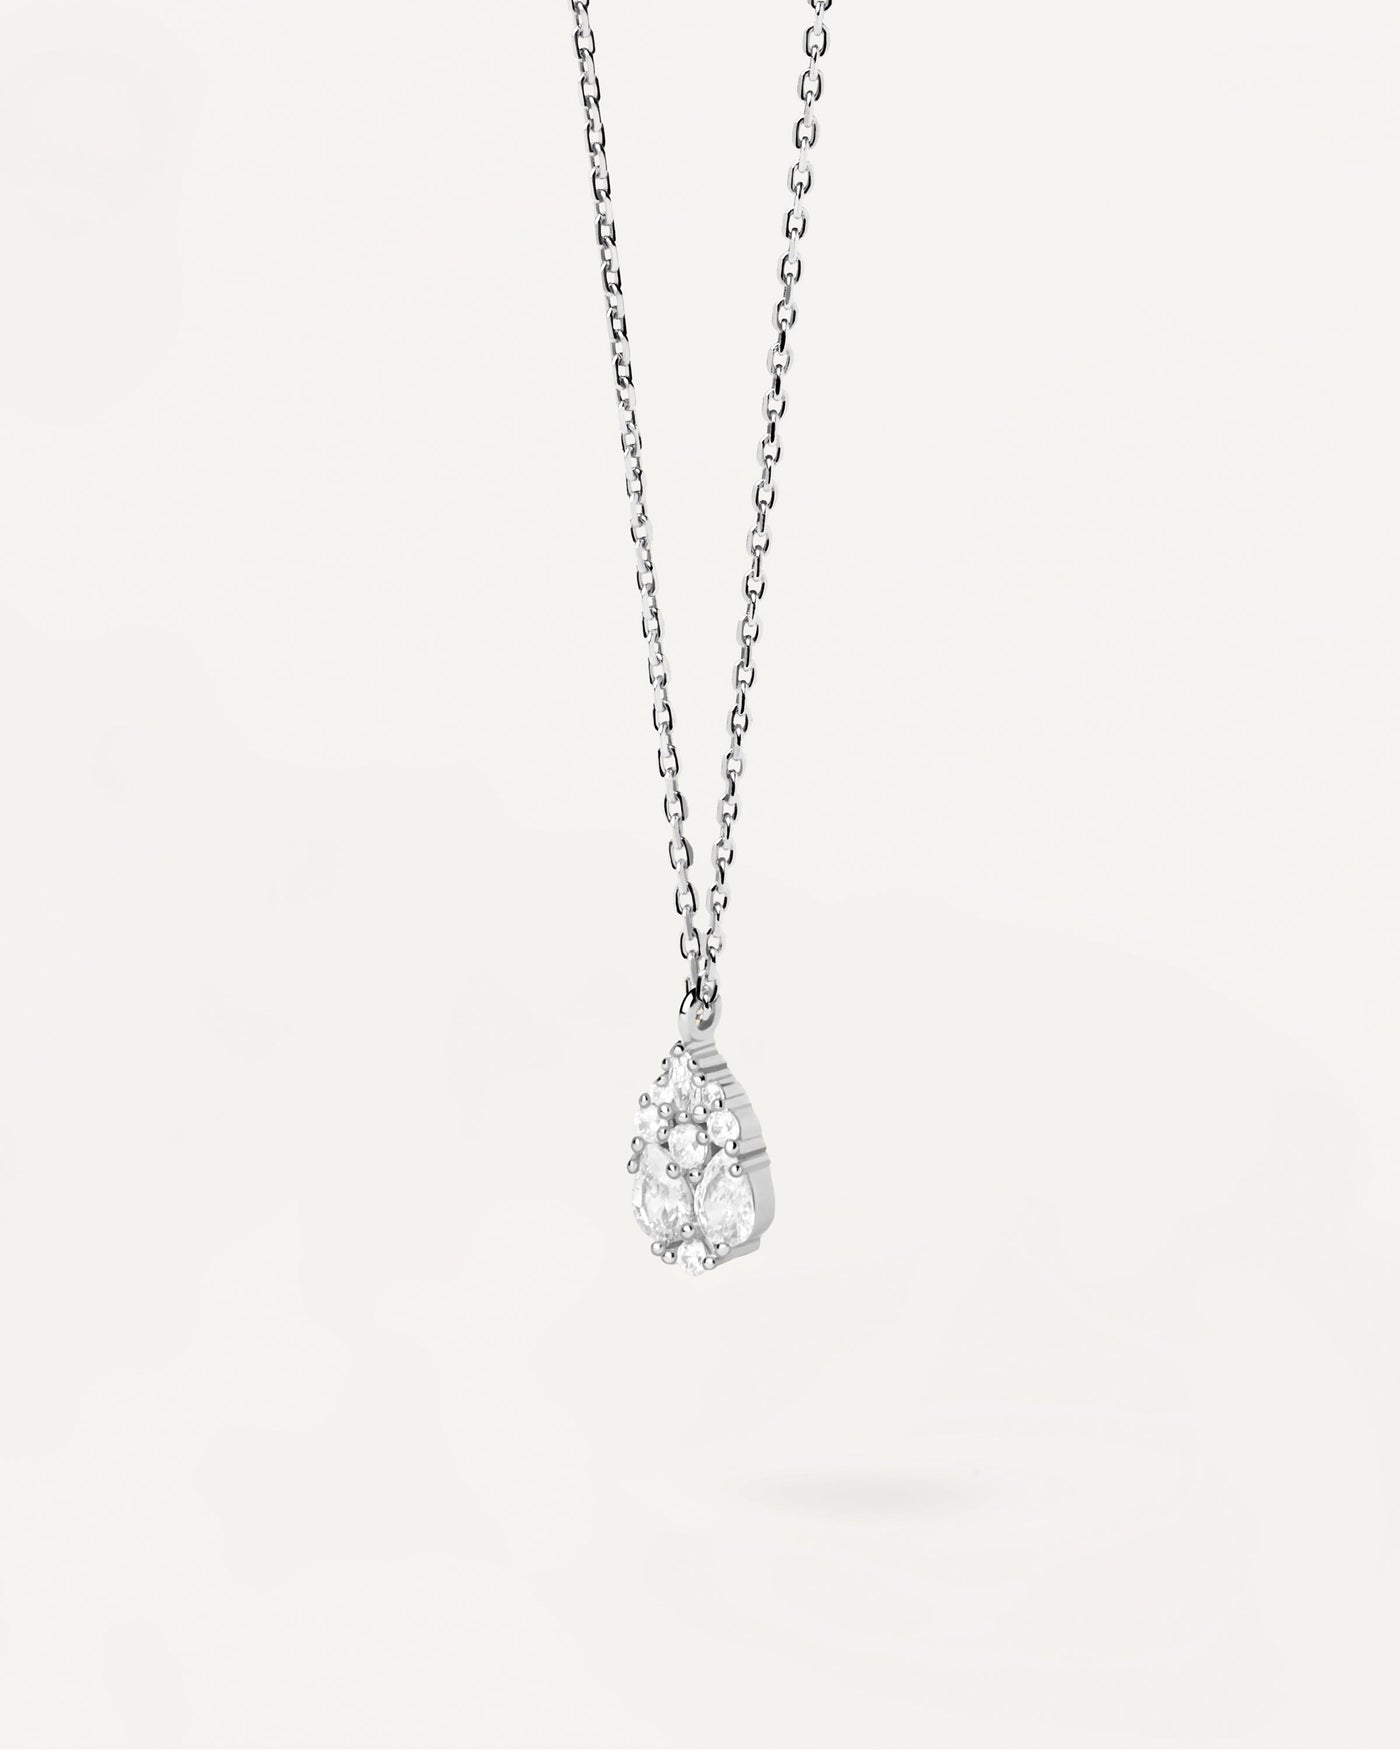 2023 Selection | Vanilla Silver Necklace. Sterling silver chain necklace with pear shape multi-stone cluster pendant . Get the latest arrival from PDPAOLA. Place your order safely and get this Best Seller. Free Shipping.